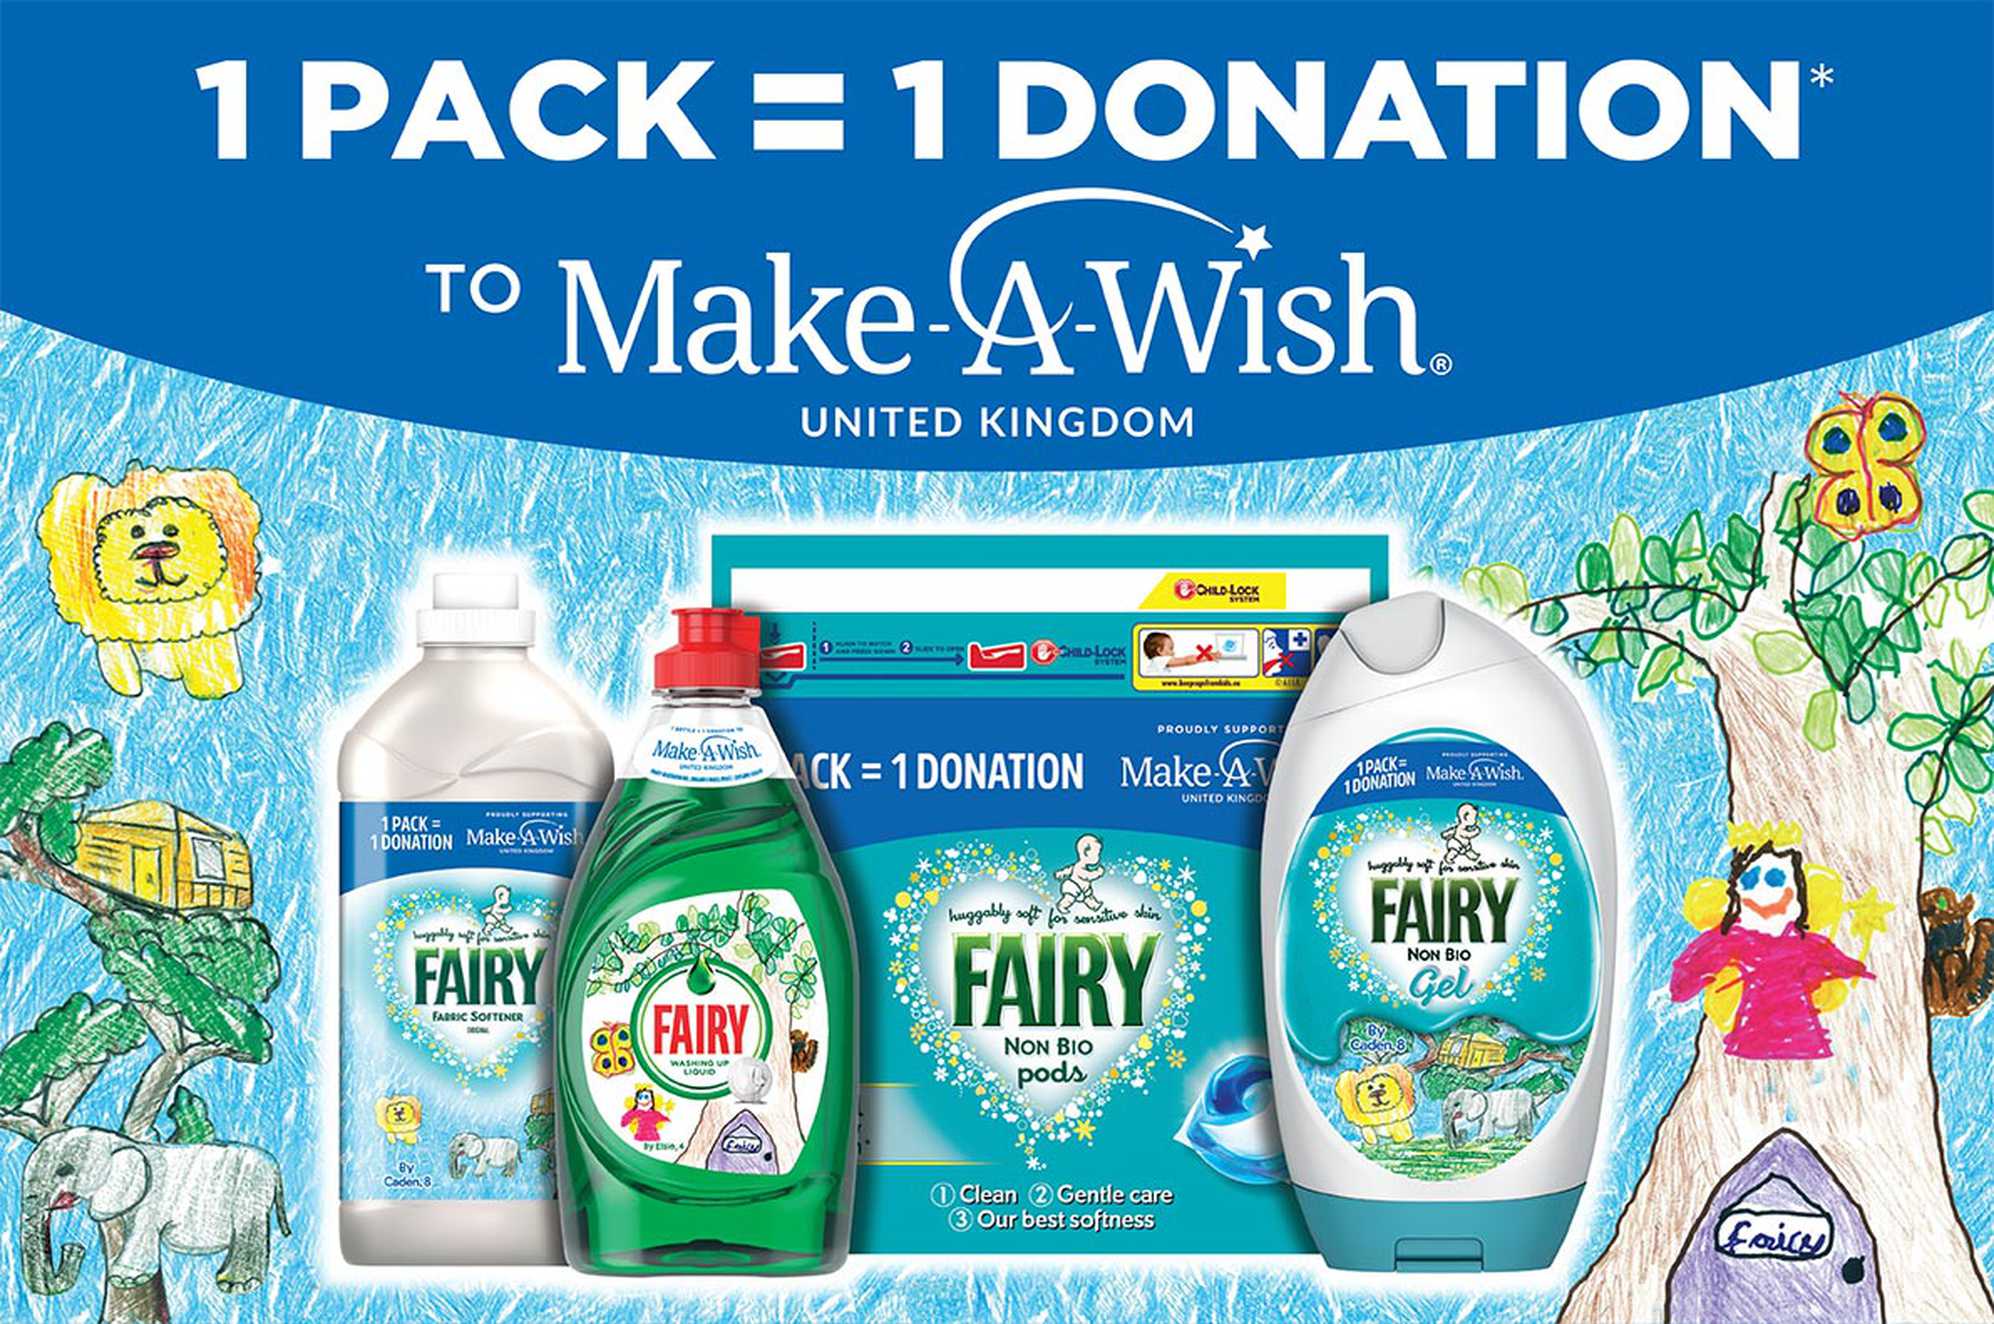 The limited edition Fairy and Fairy Non Bio products, featuring artwork by wish children, Elsie and Caden, with the text '1 pack = 1 donation'.